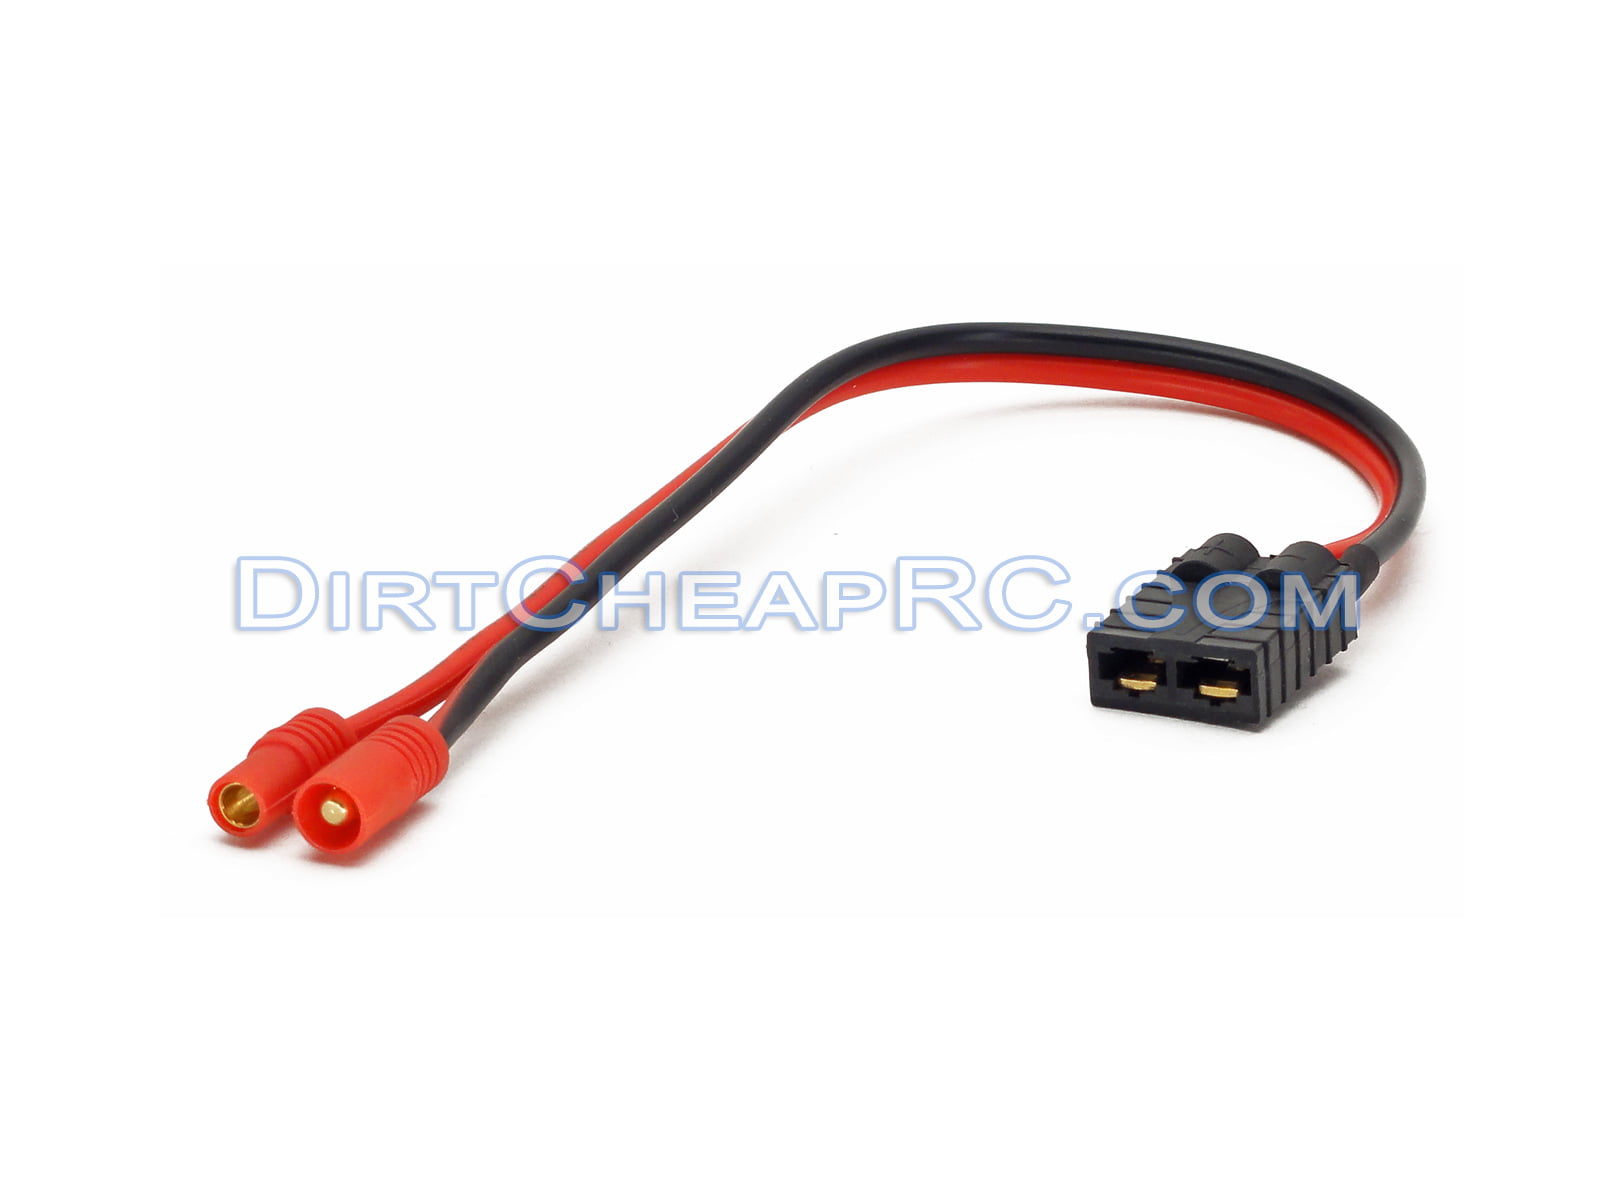 Details about   2x EC3 Losi Male to 1x TRX Female Parallel 14AWG 5CM Wire Adapter for Traxxas 